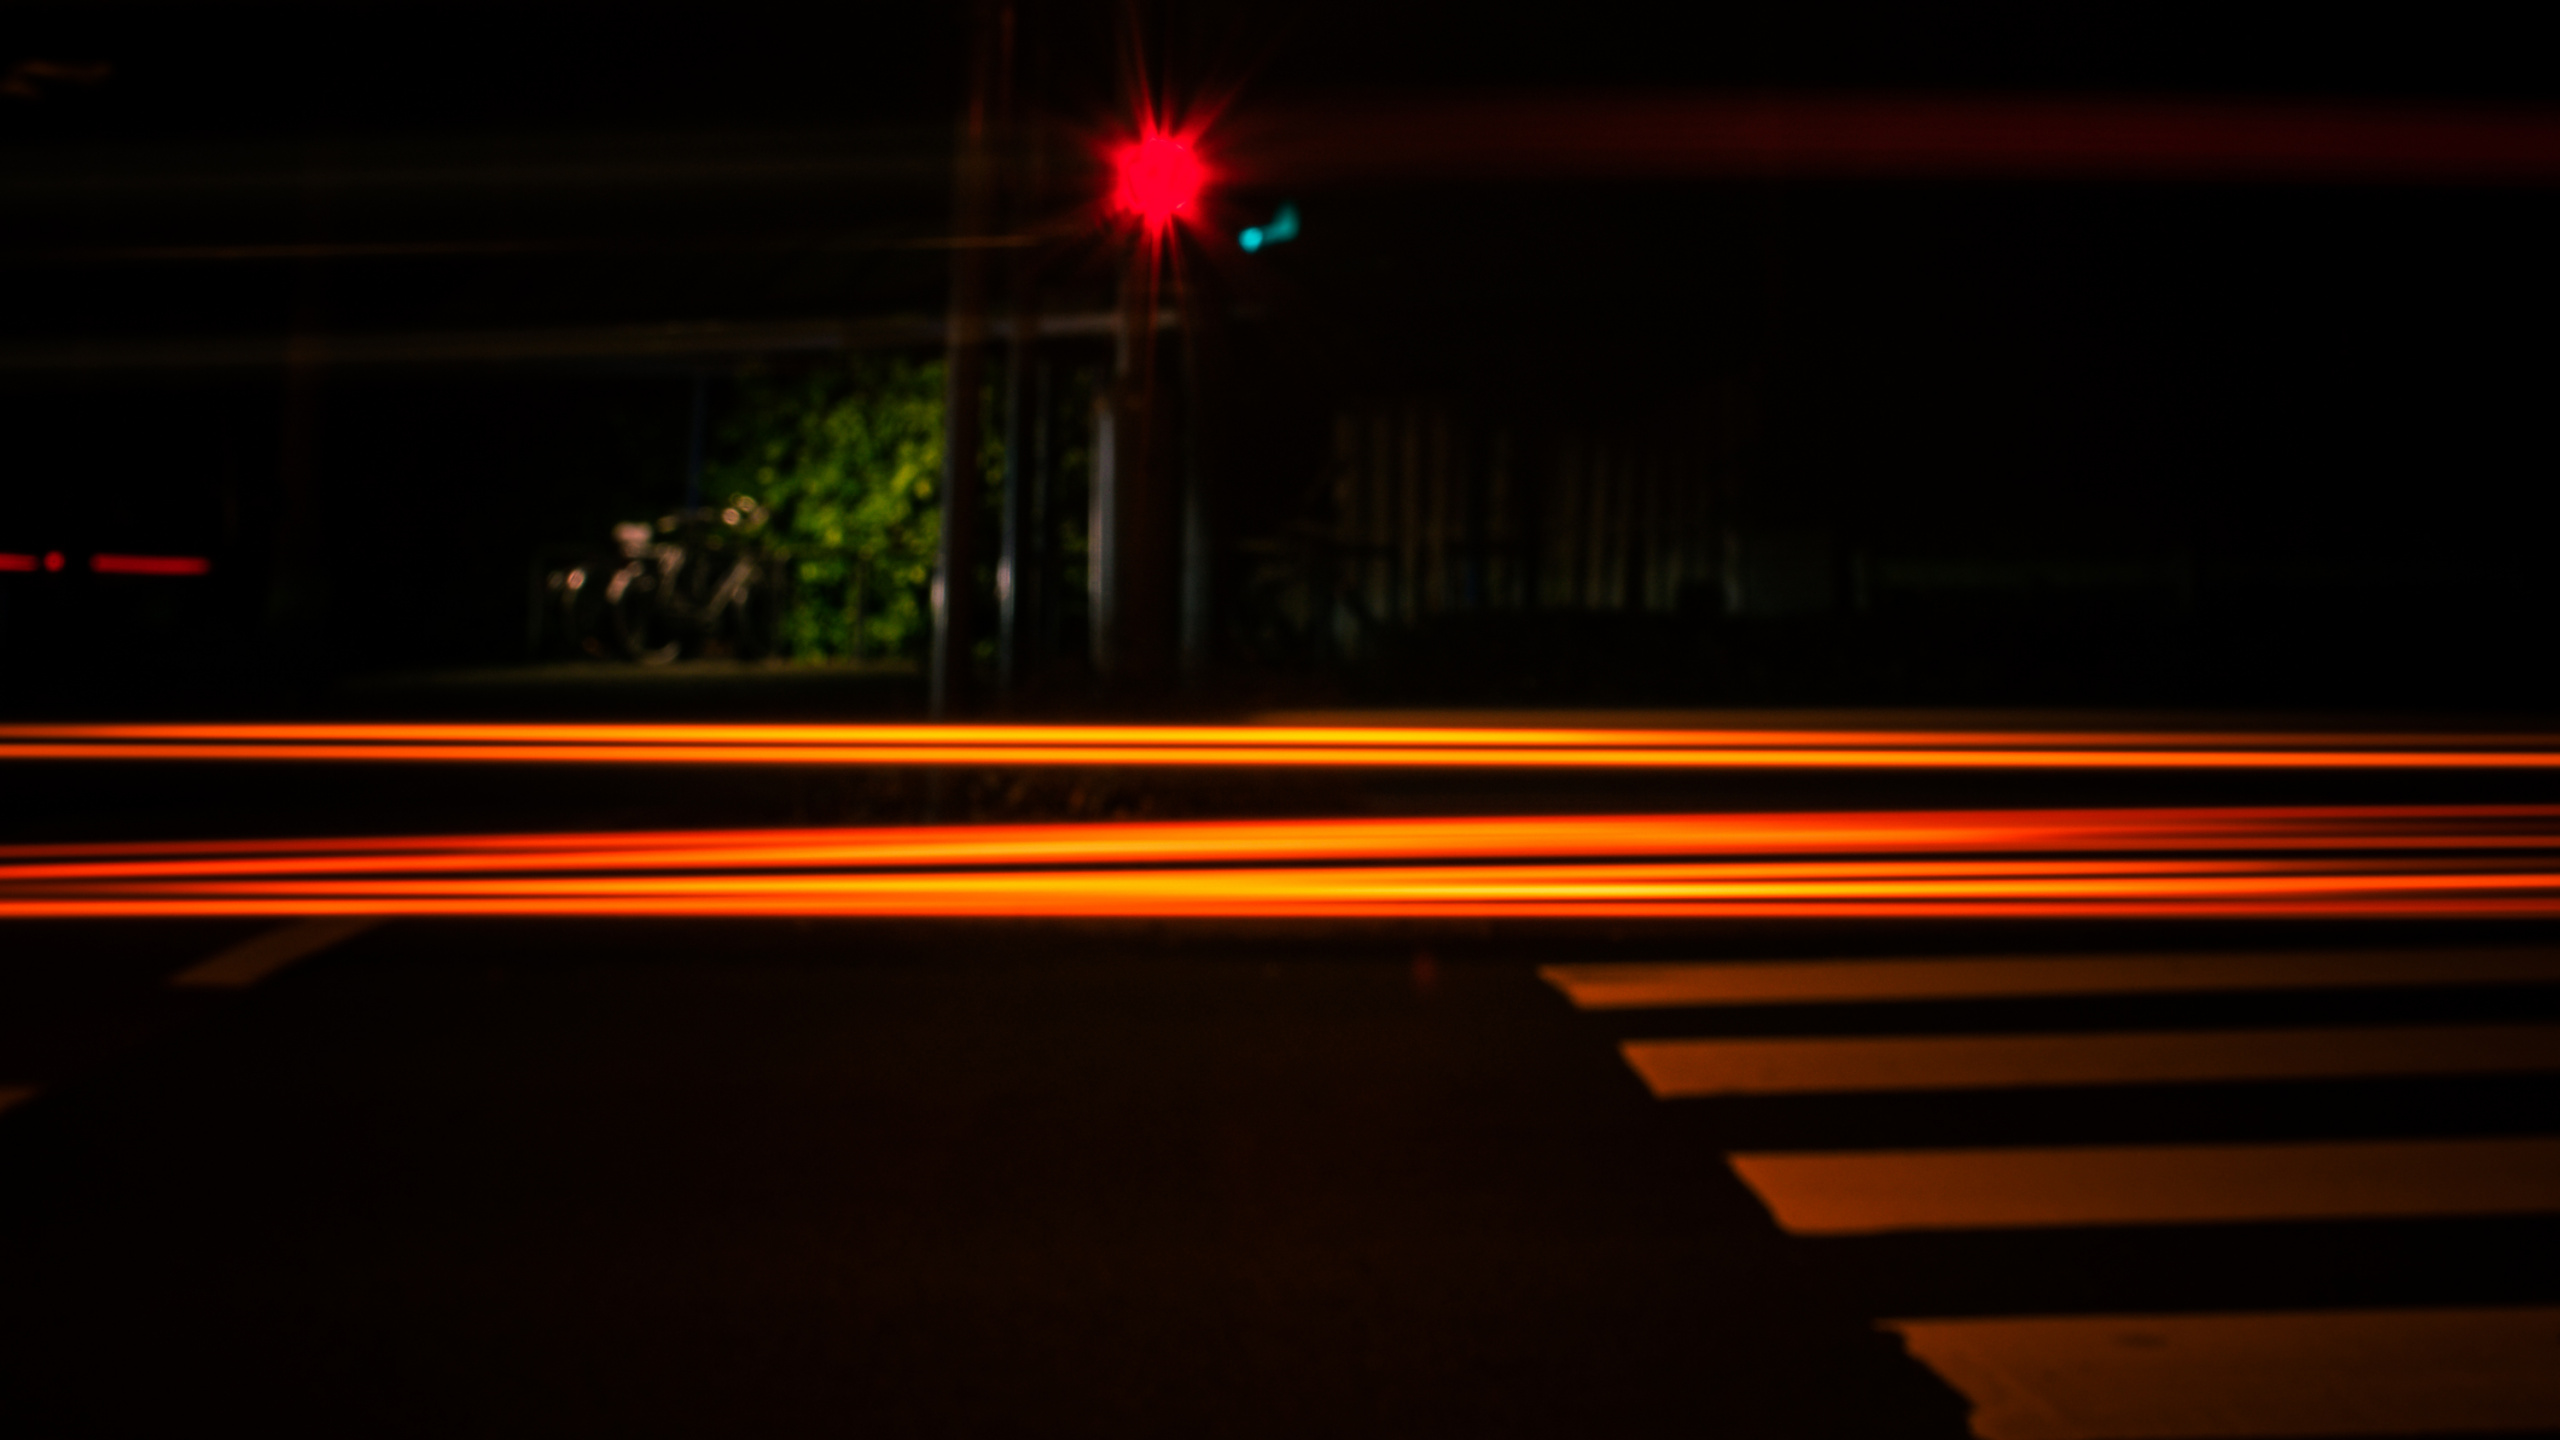 Red Light on The Road During Night Time. Wallpaper in 2560x1440 Resolution